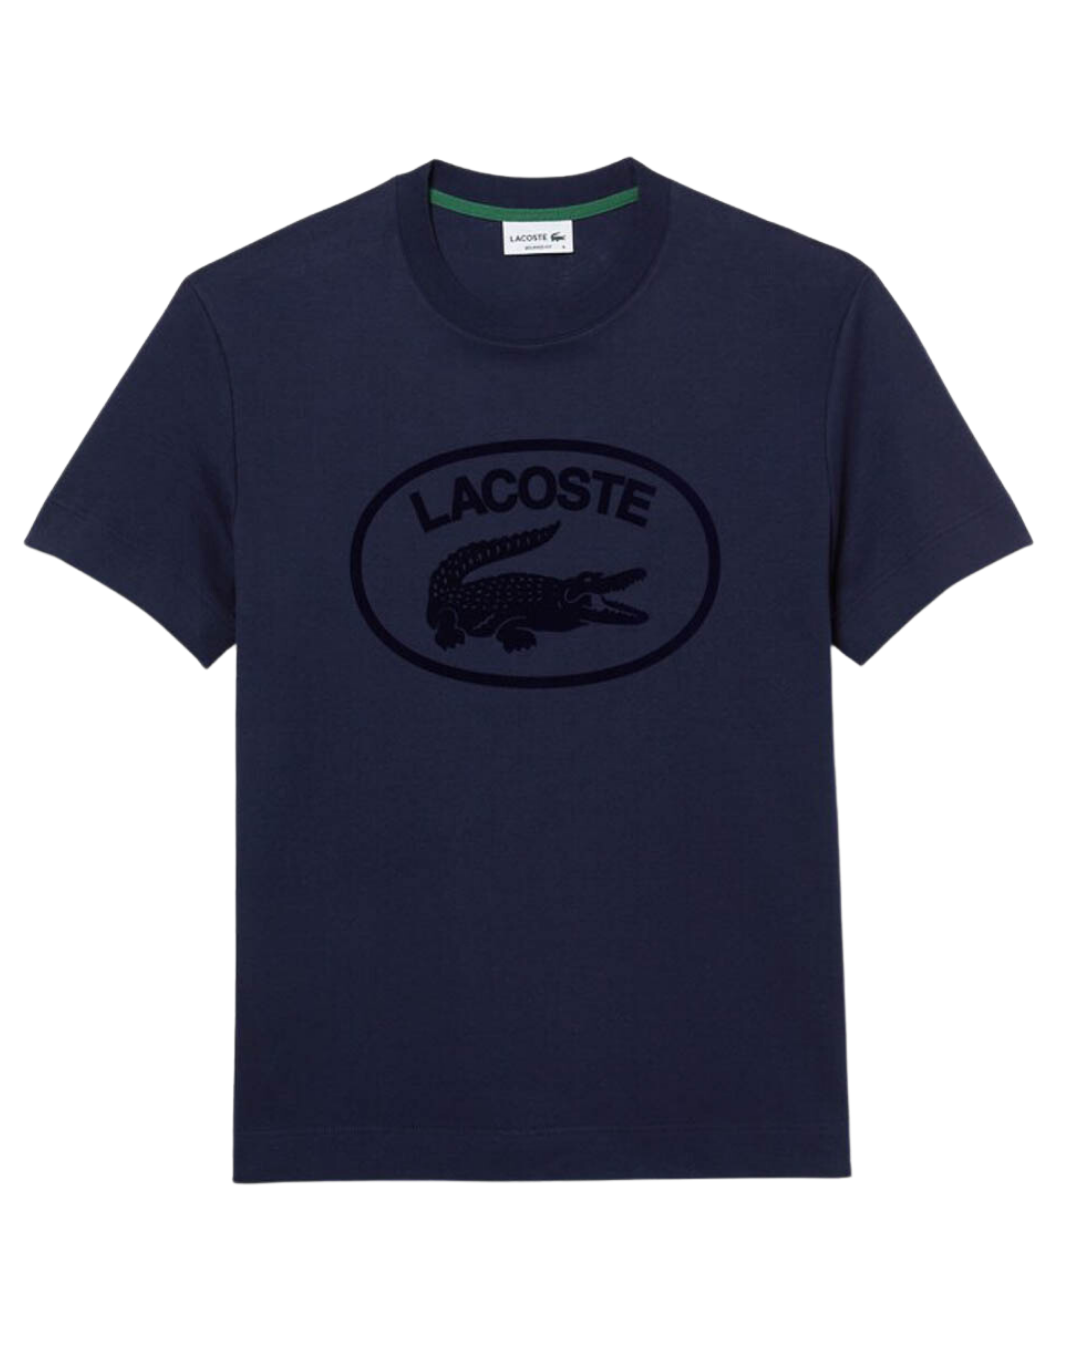 Lacoste Herre Relaxed Fit tone-i-tone mærket bomuld T-shirt